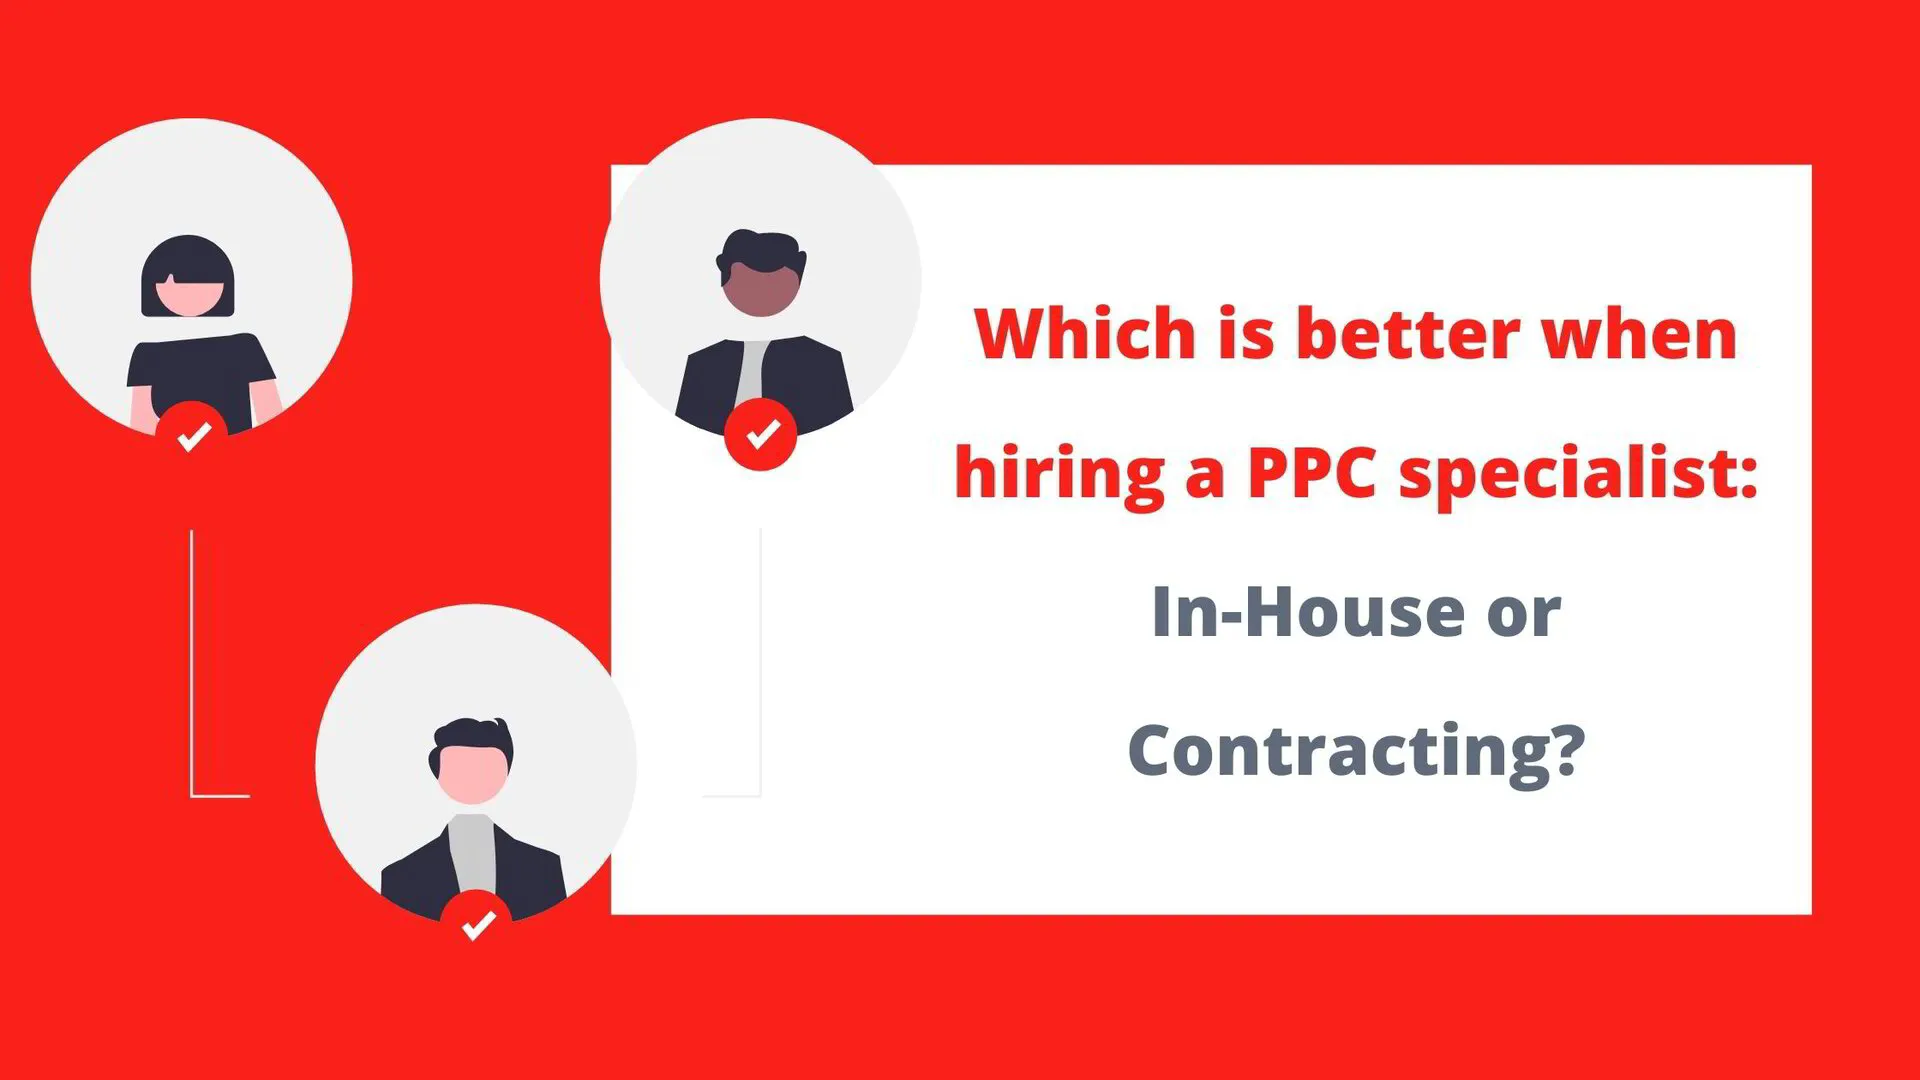 Which is better when hiring a PPC specialist: In-House or Contracting?